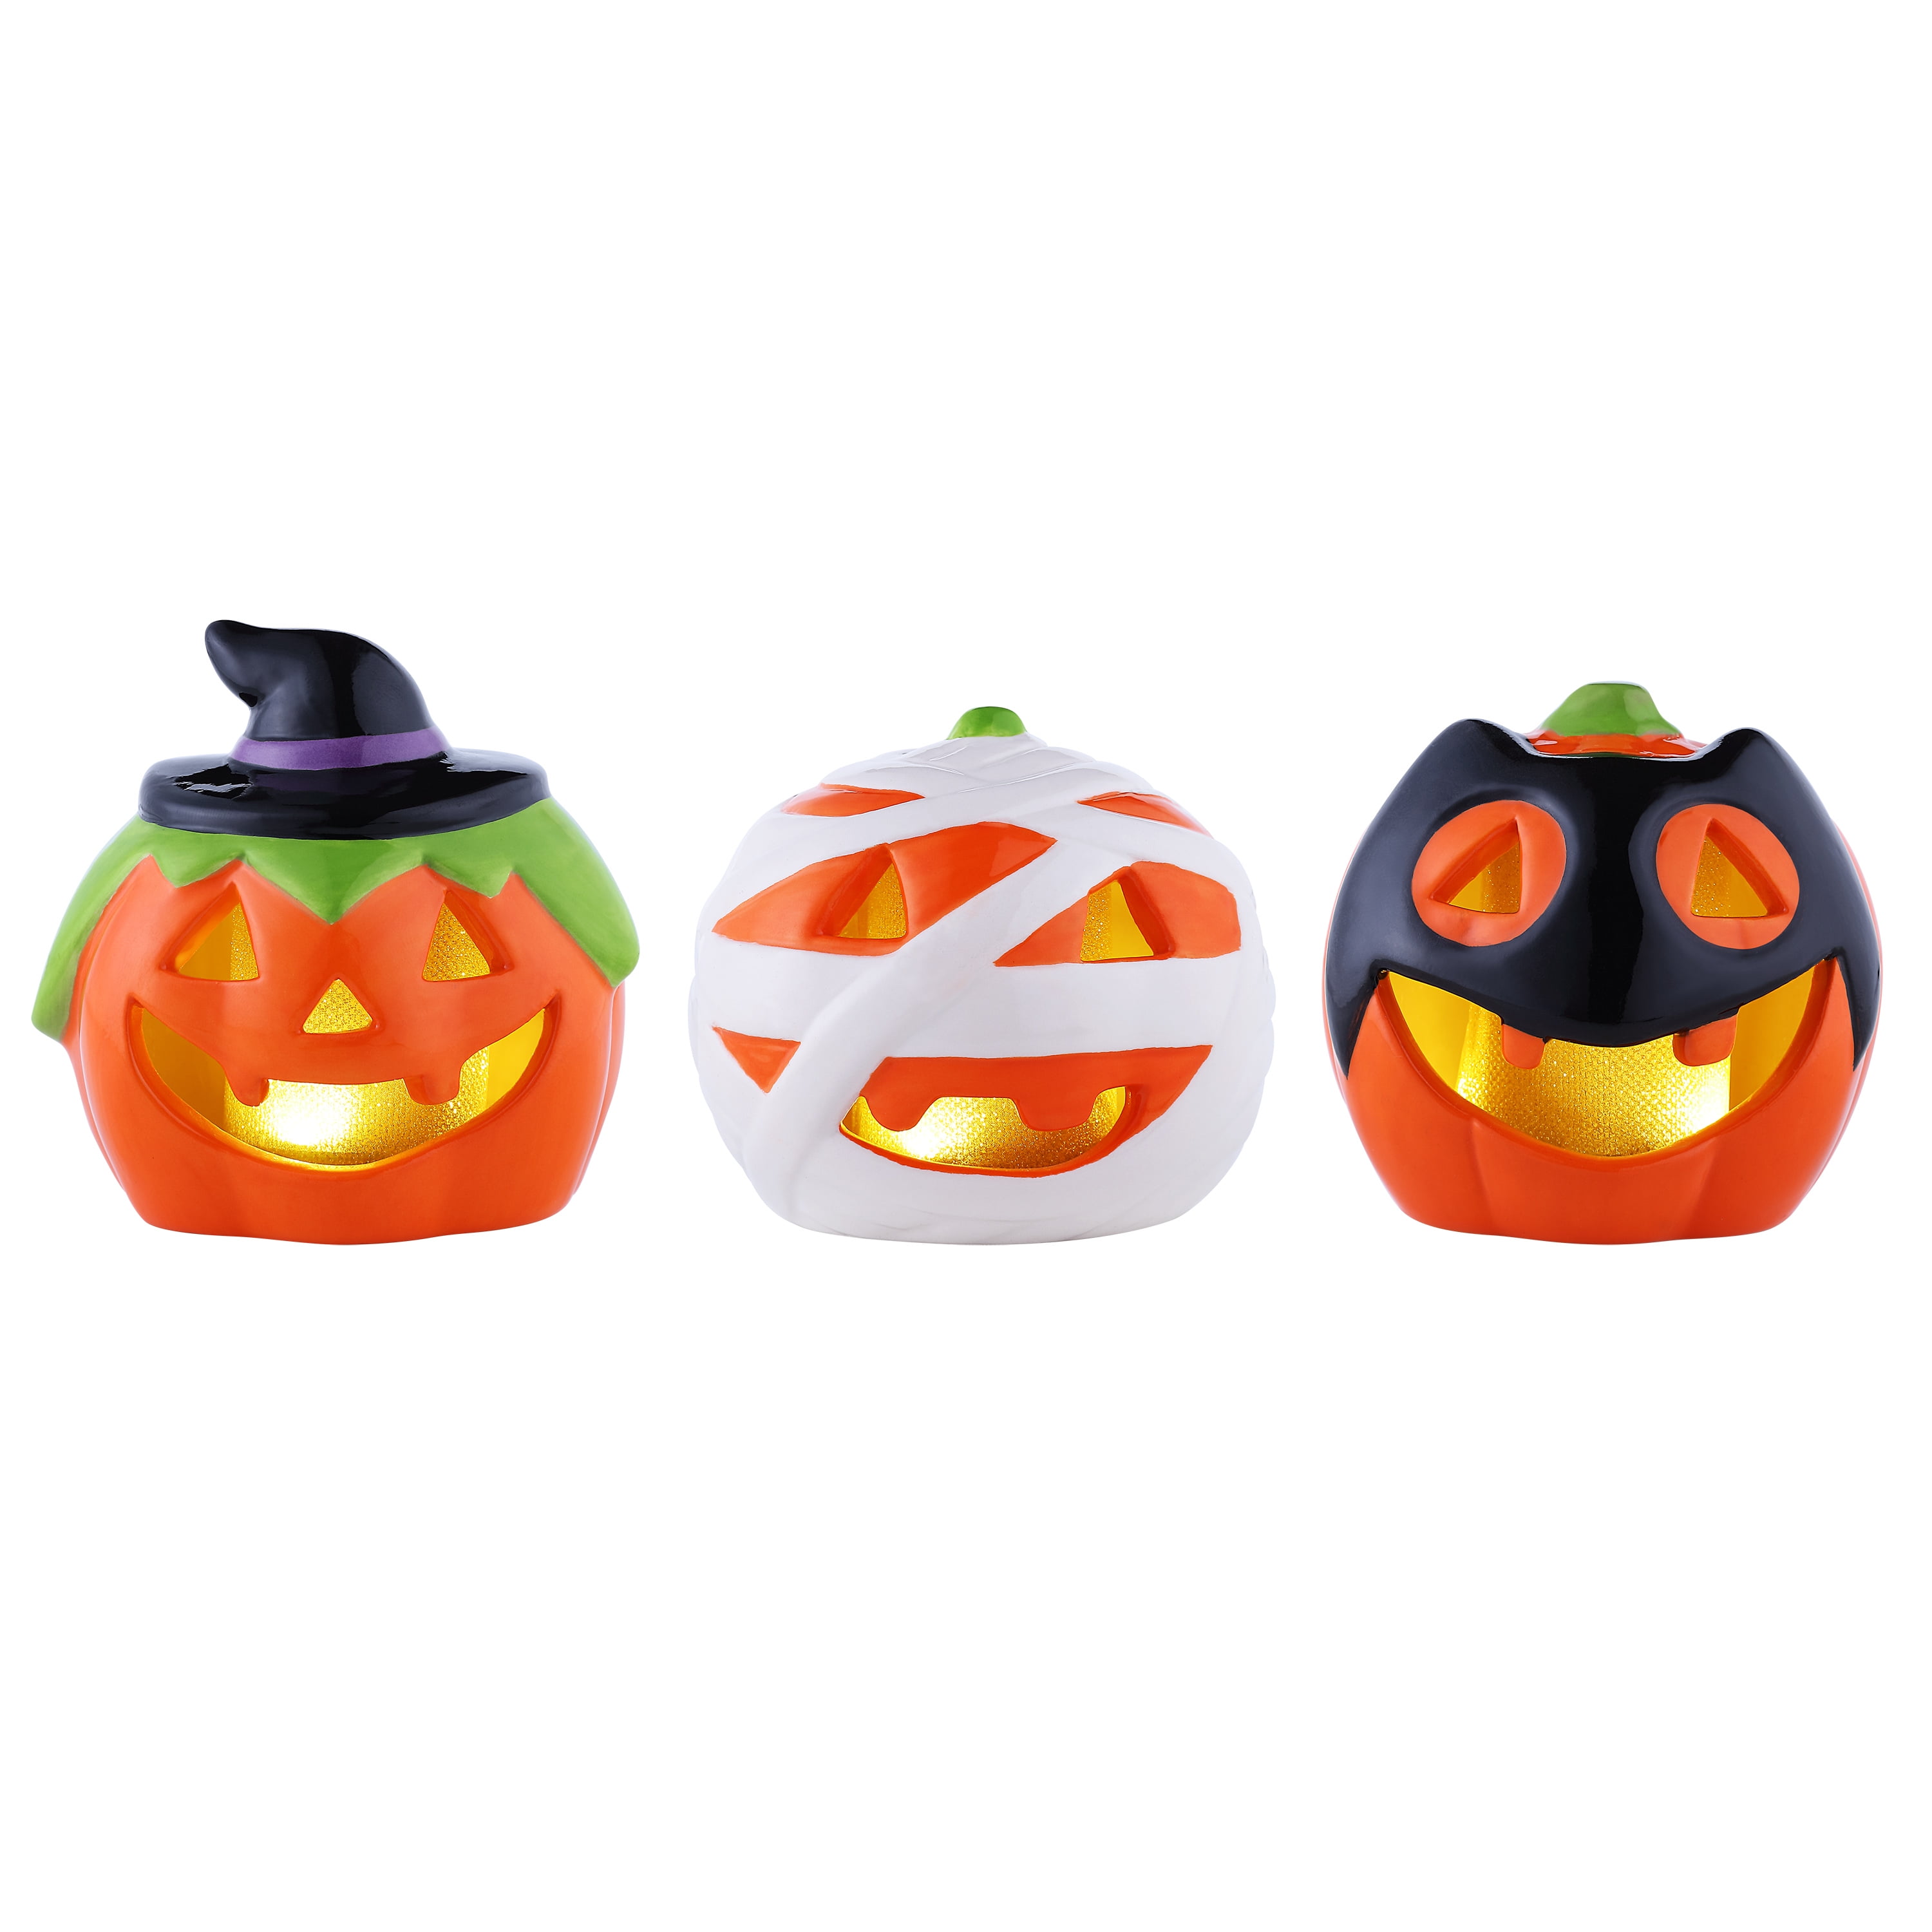 NEW! AWESOME HALLOWEEN MINI PORTABLE LANTERN LIGHT GREAT FOR TRICK-OR-TREAT 